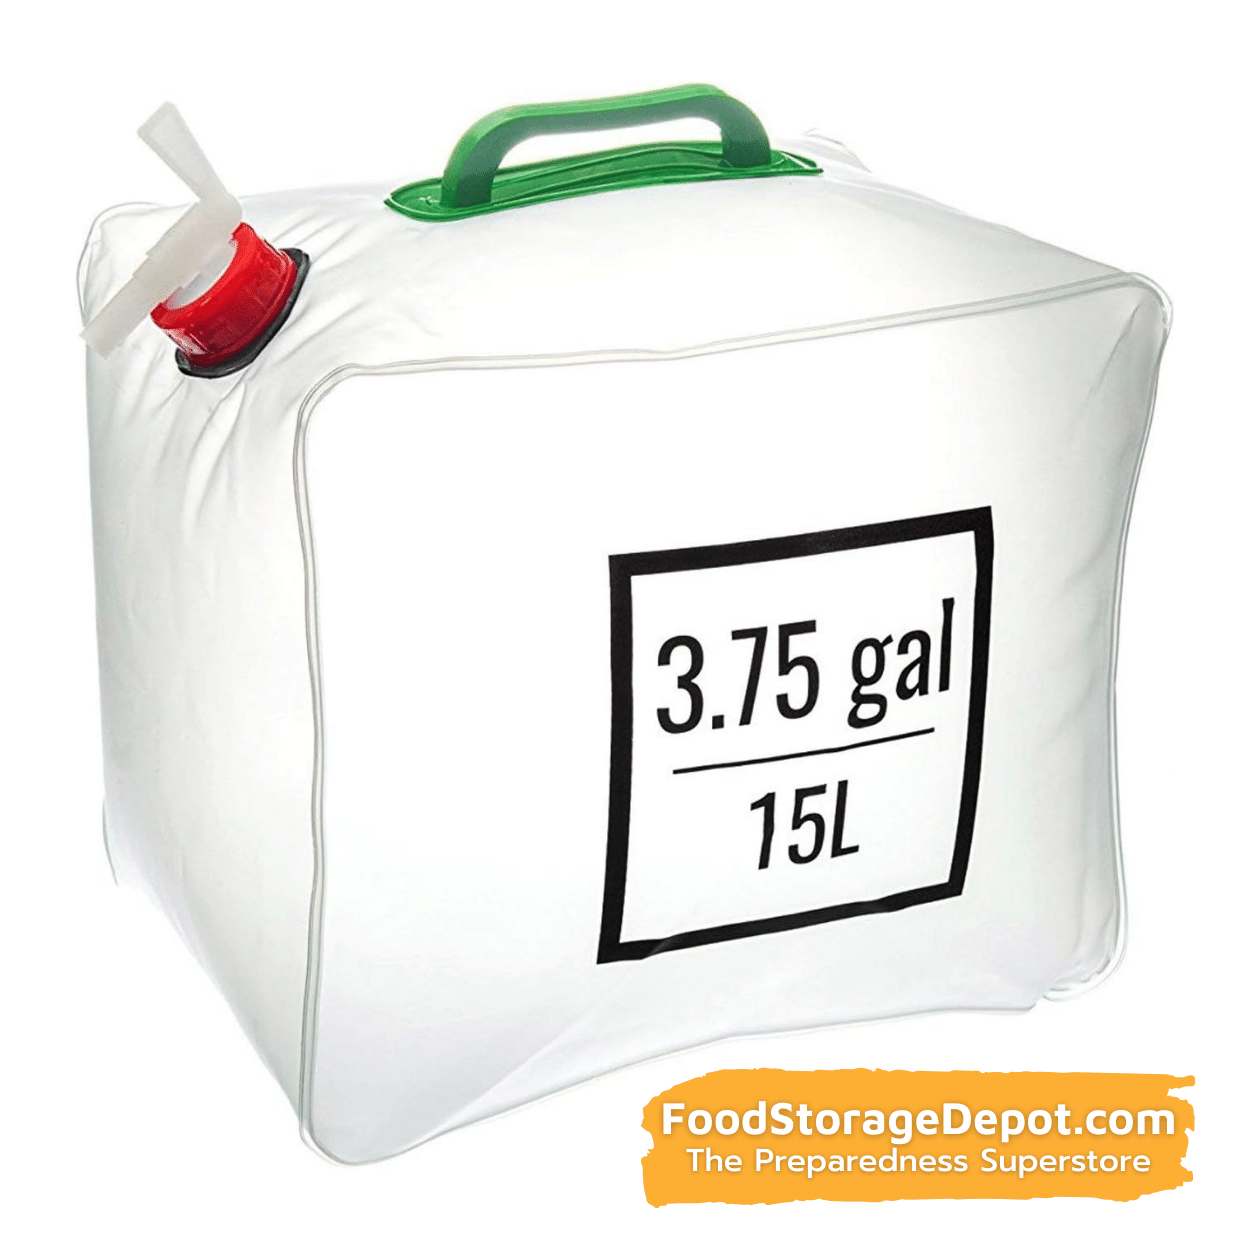 Collapsible Water Carrier with Handle (3.75 Gal)